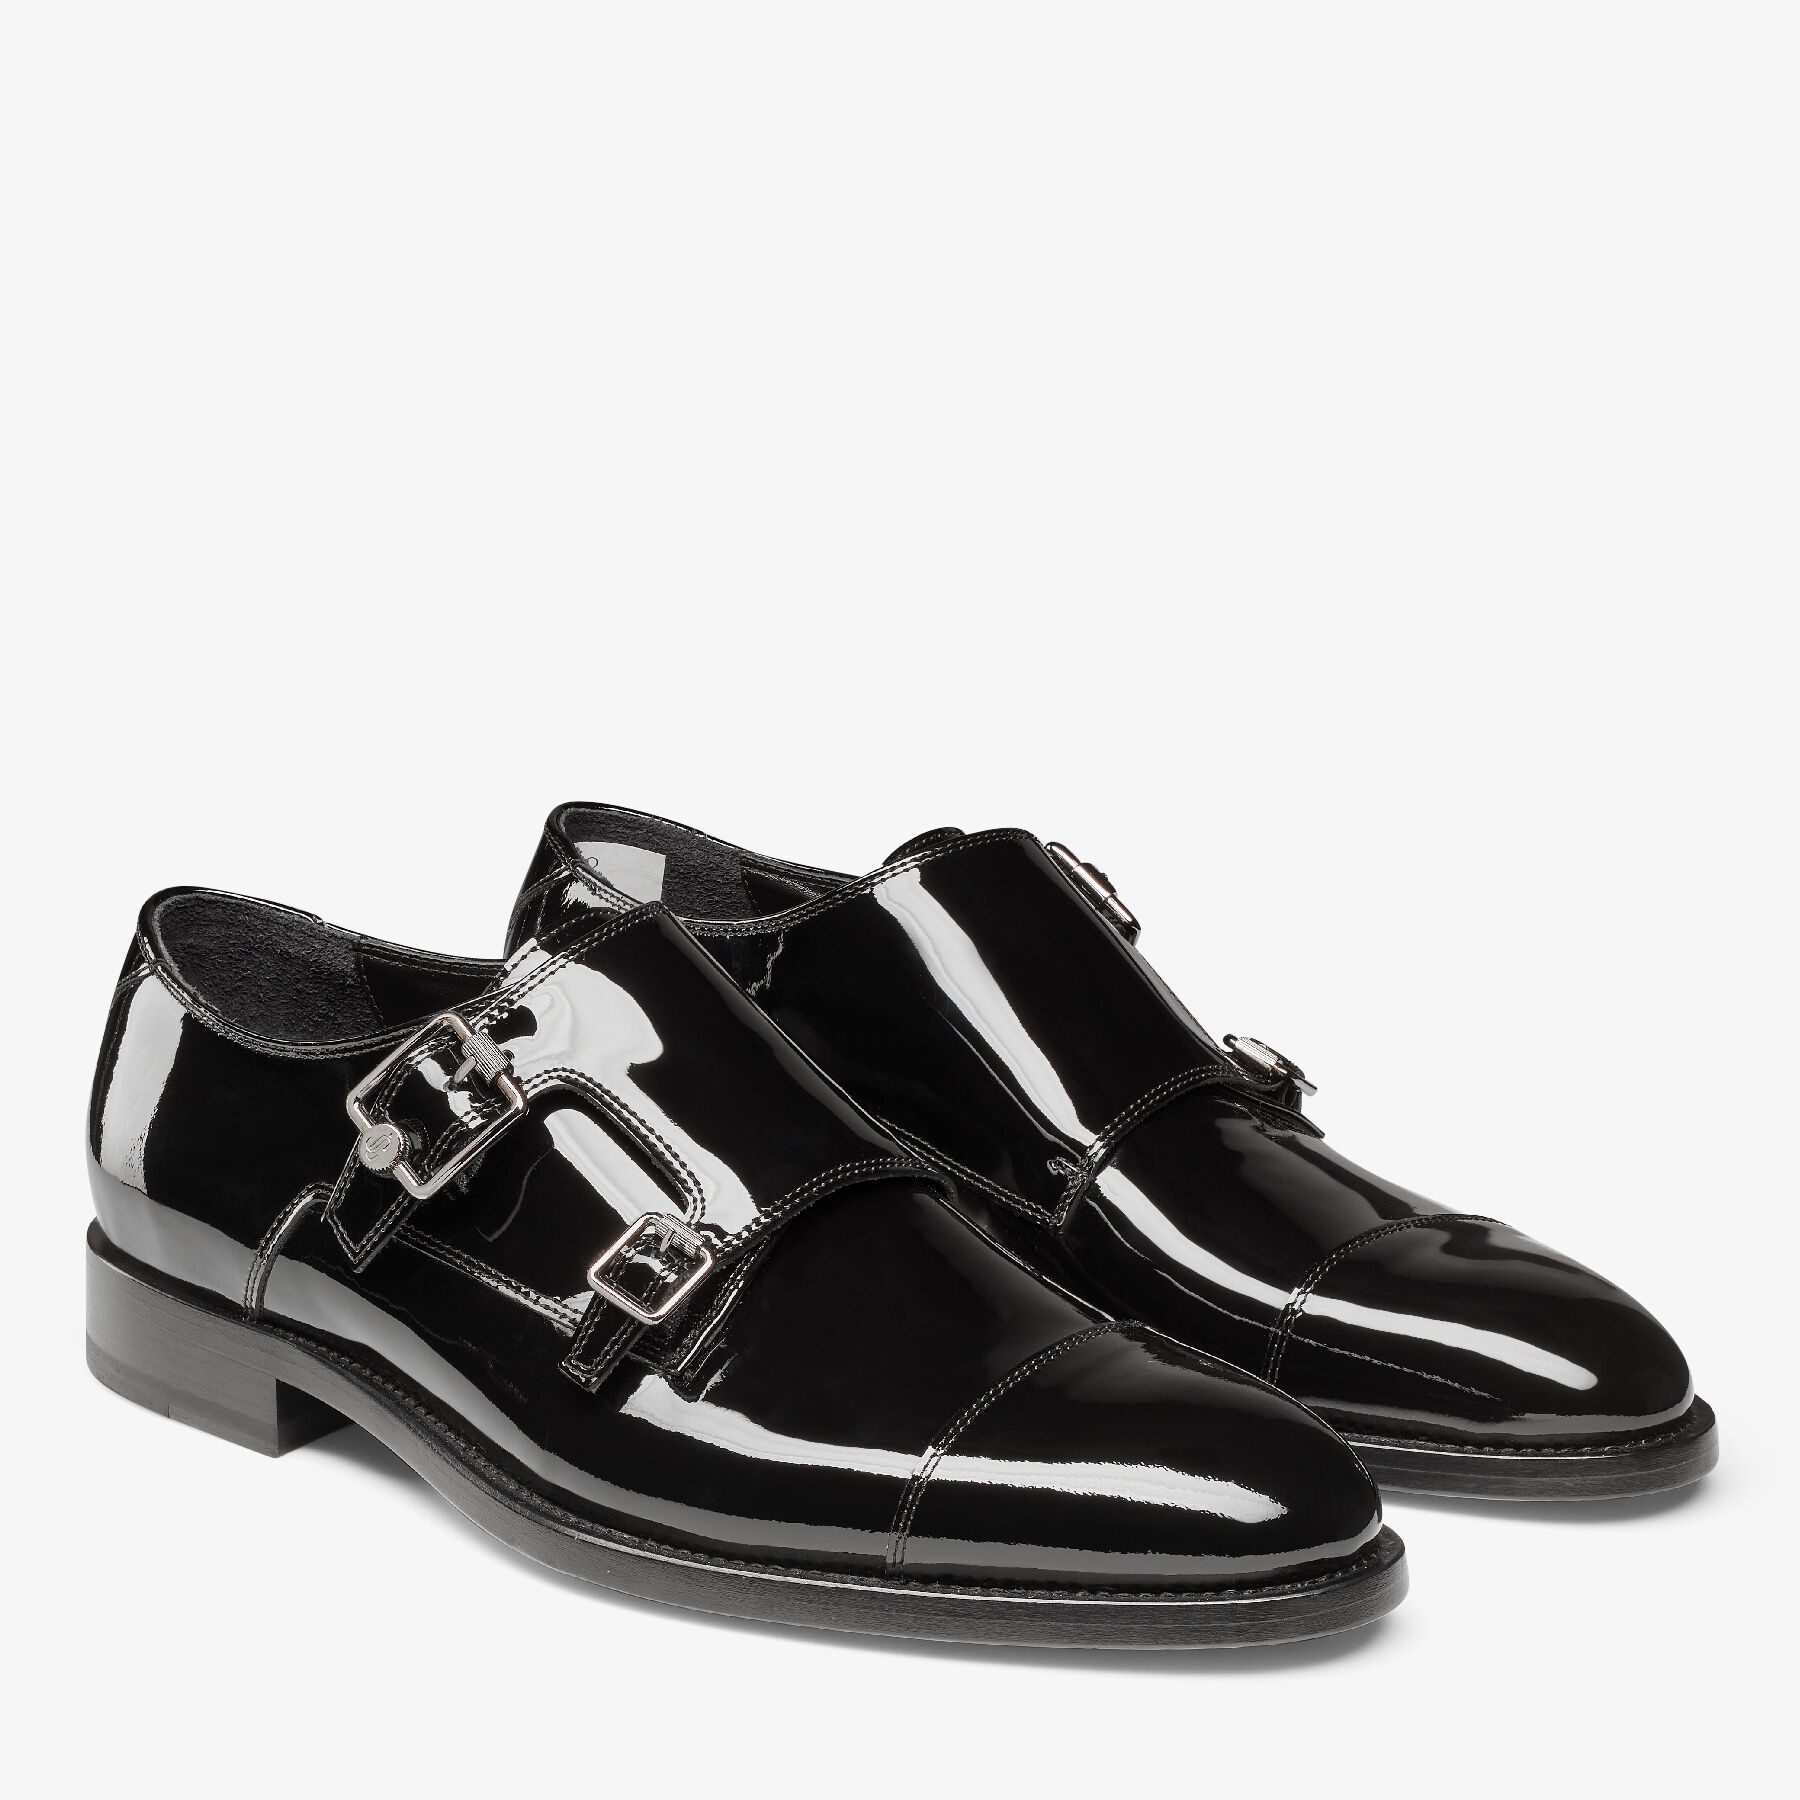 Finnion Monkstrap
Black Patent Leather Monk Strap Shoes with Studs - 2